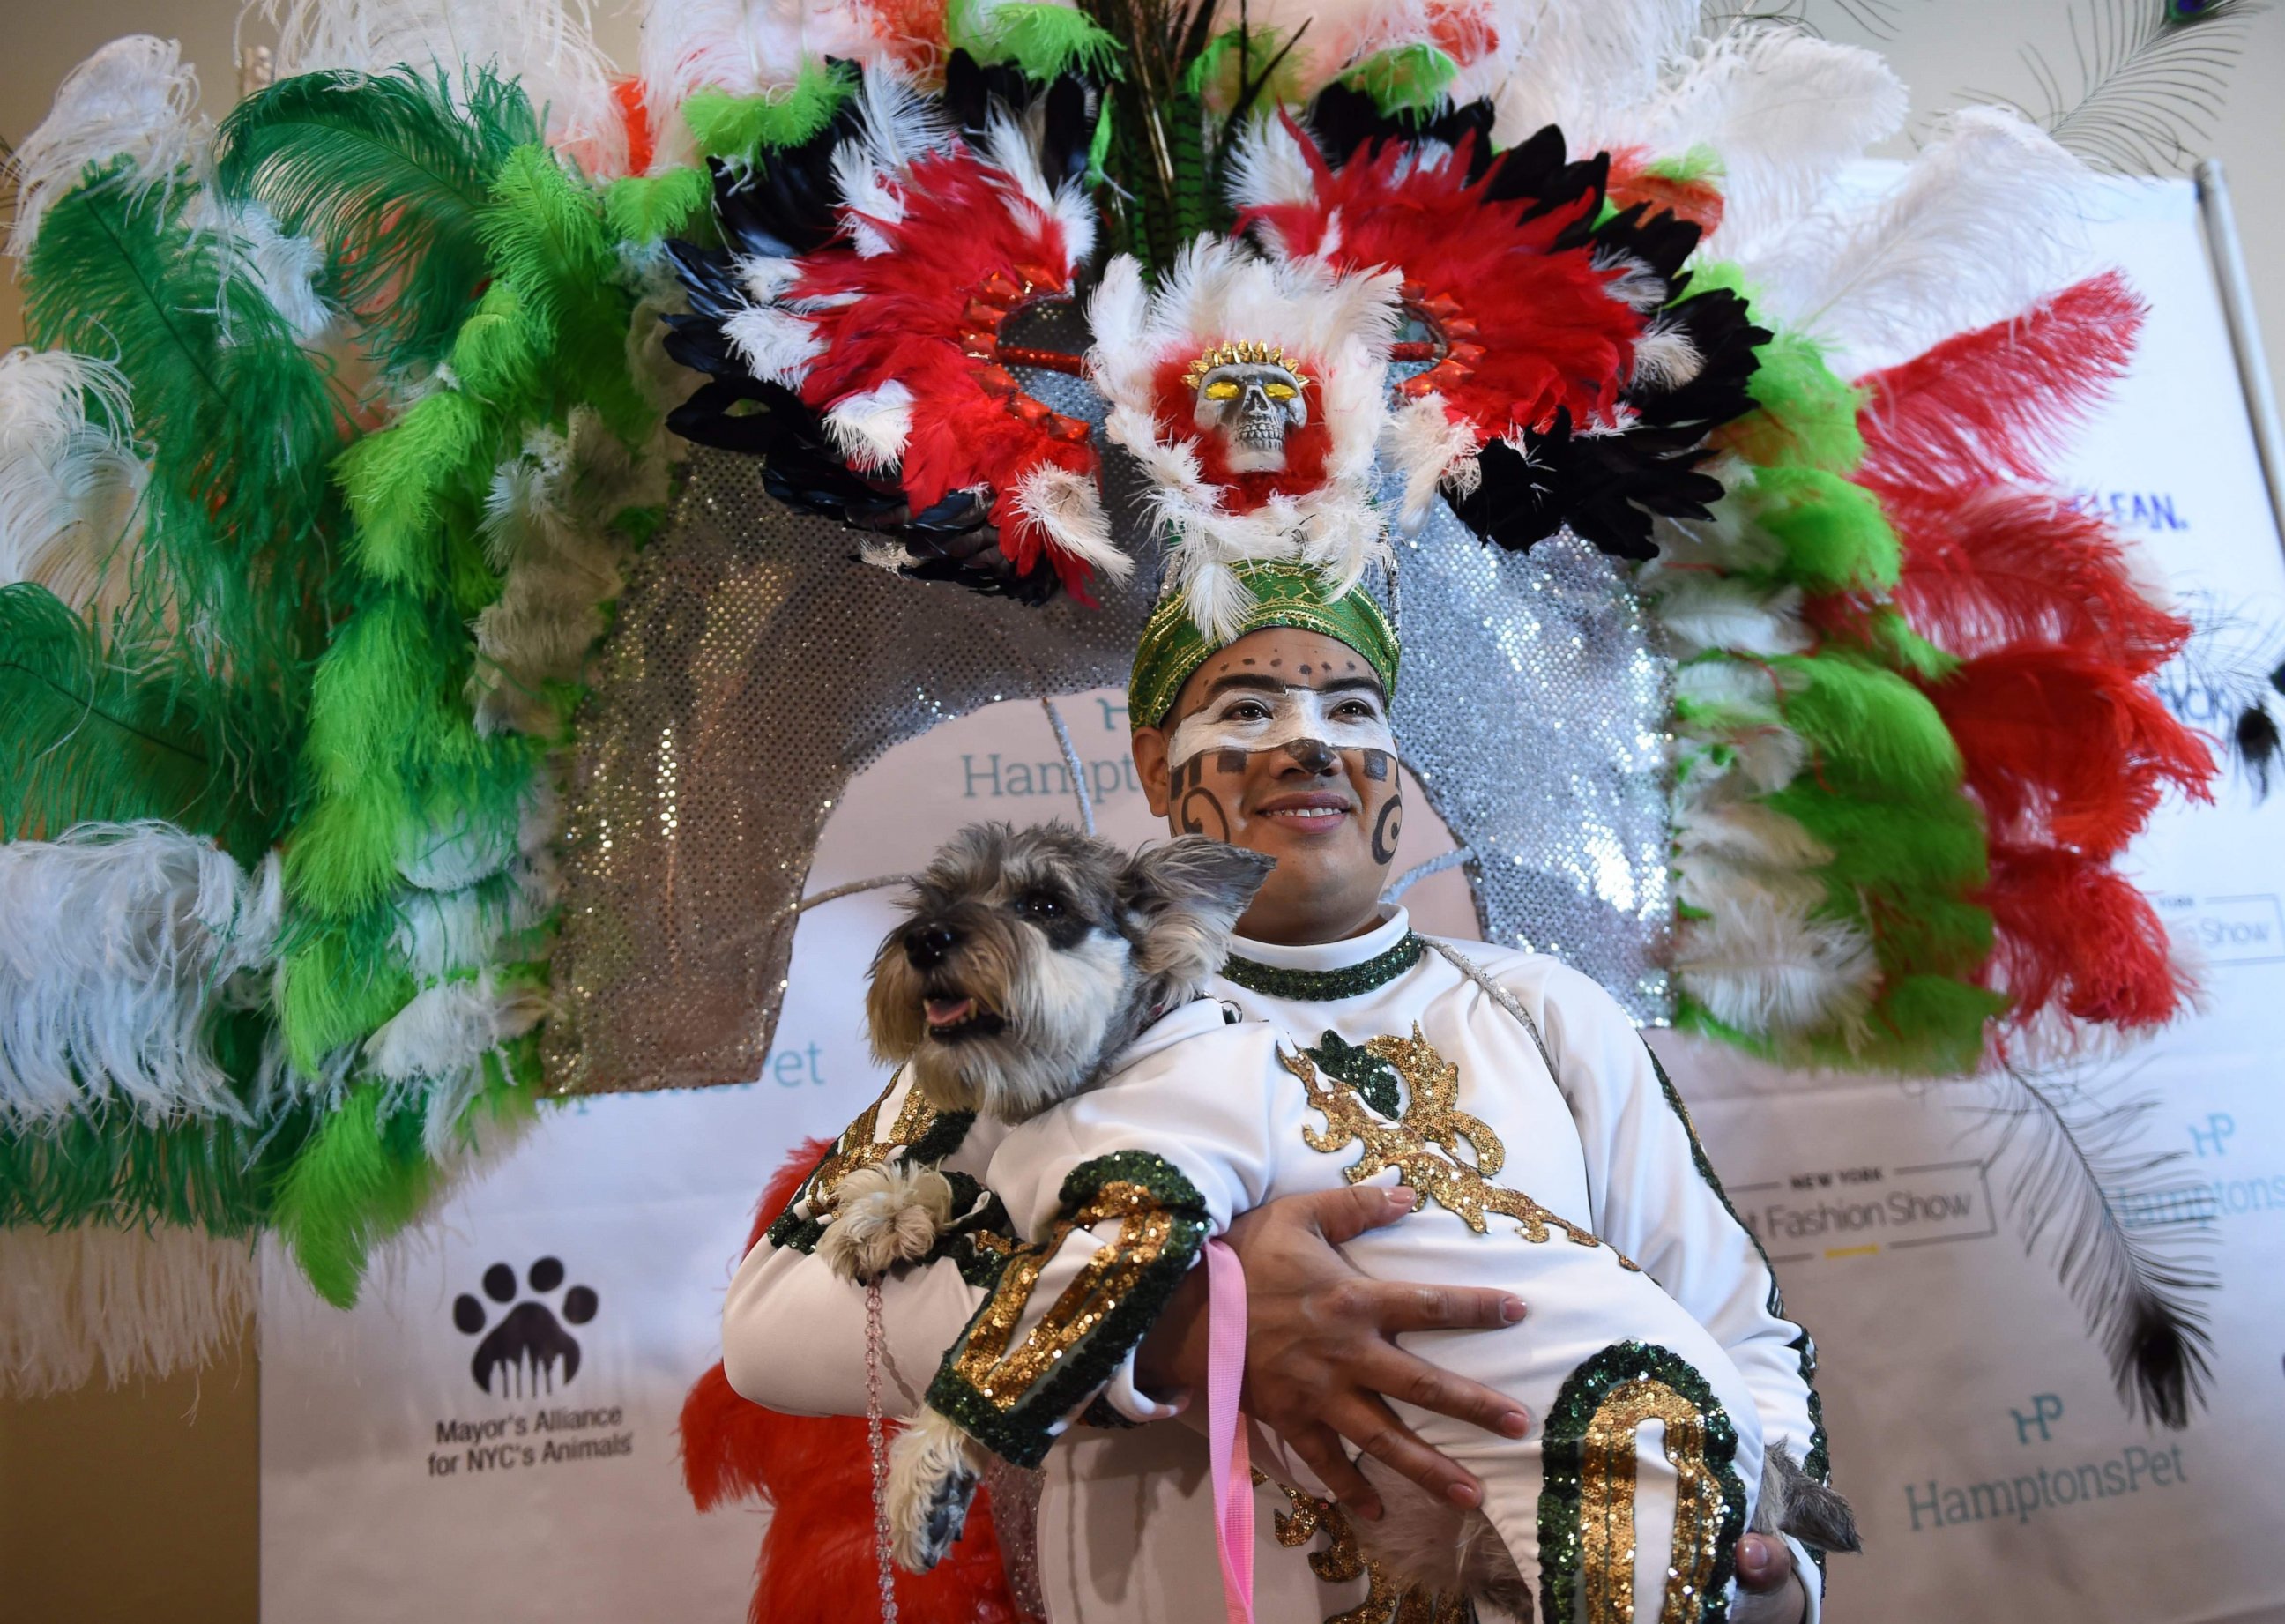 PHOTO: Miguel Garcia with his dog dressed in the fashion of Mexico posed during the 14th Annual New York Pet Fashion Show, Feb. 9, 2017.